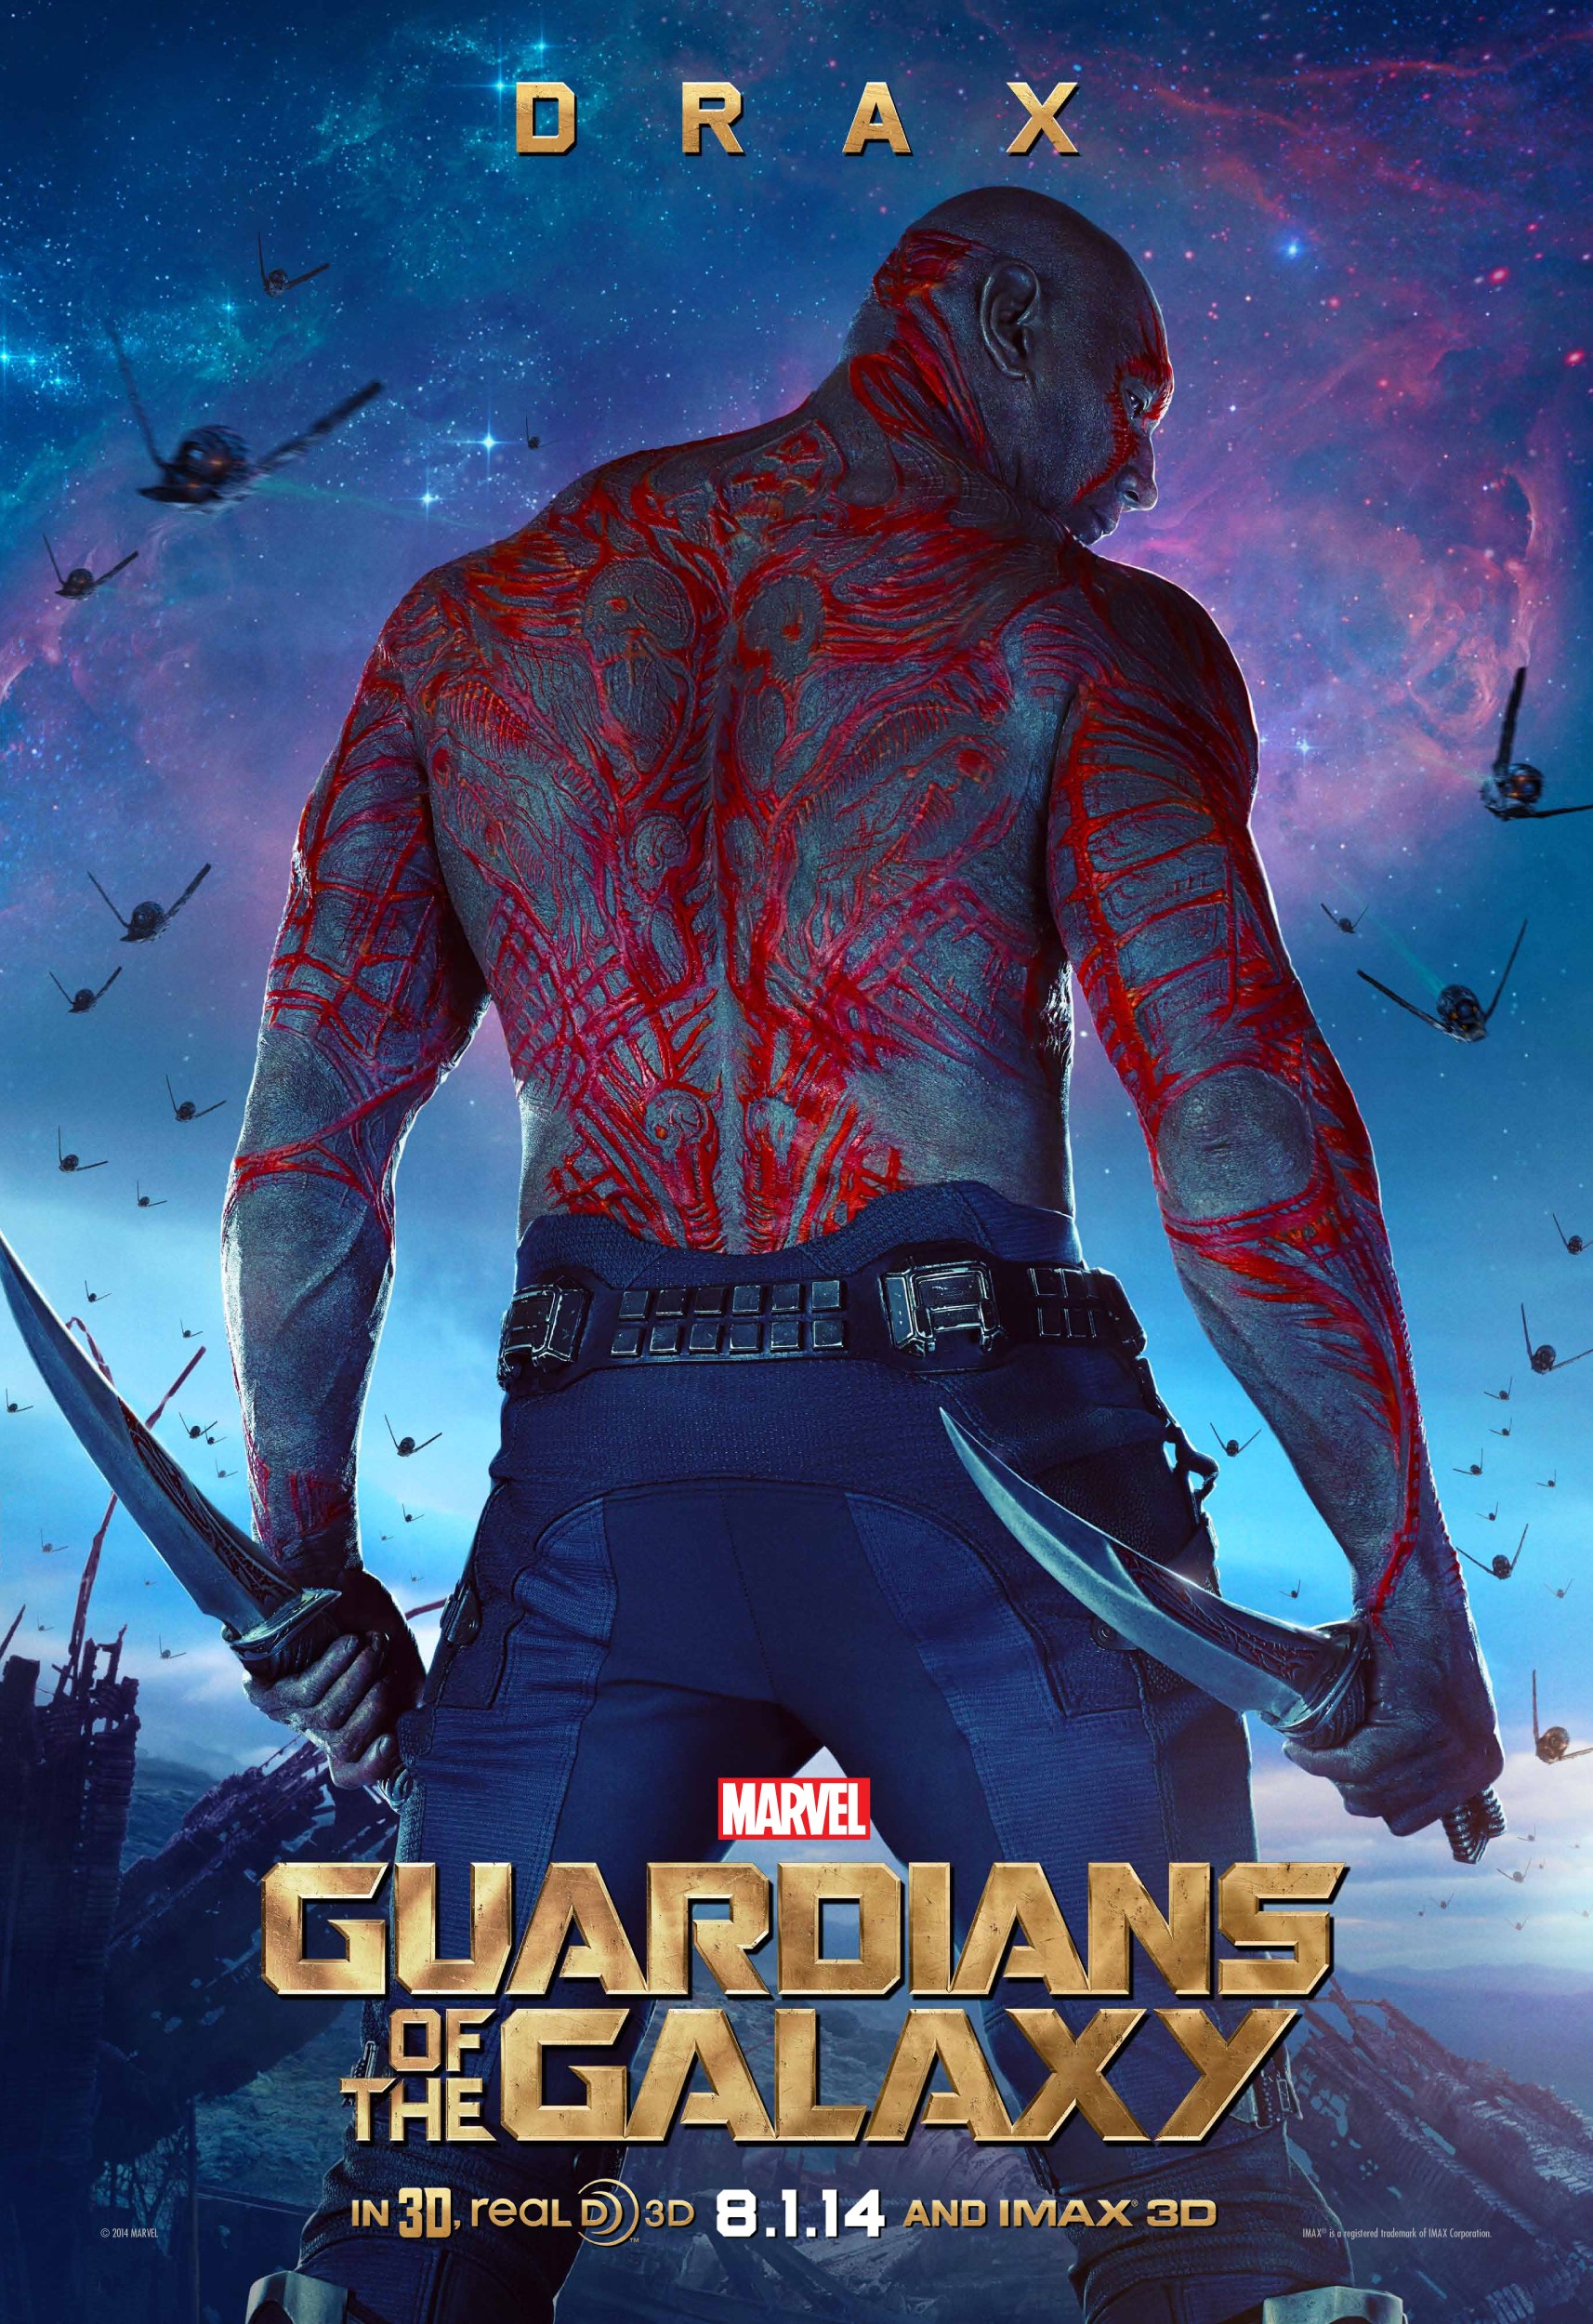 Mega Sized Movie Poster Image for Guardians of the Galaxy (#6 of 23)